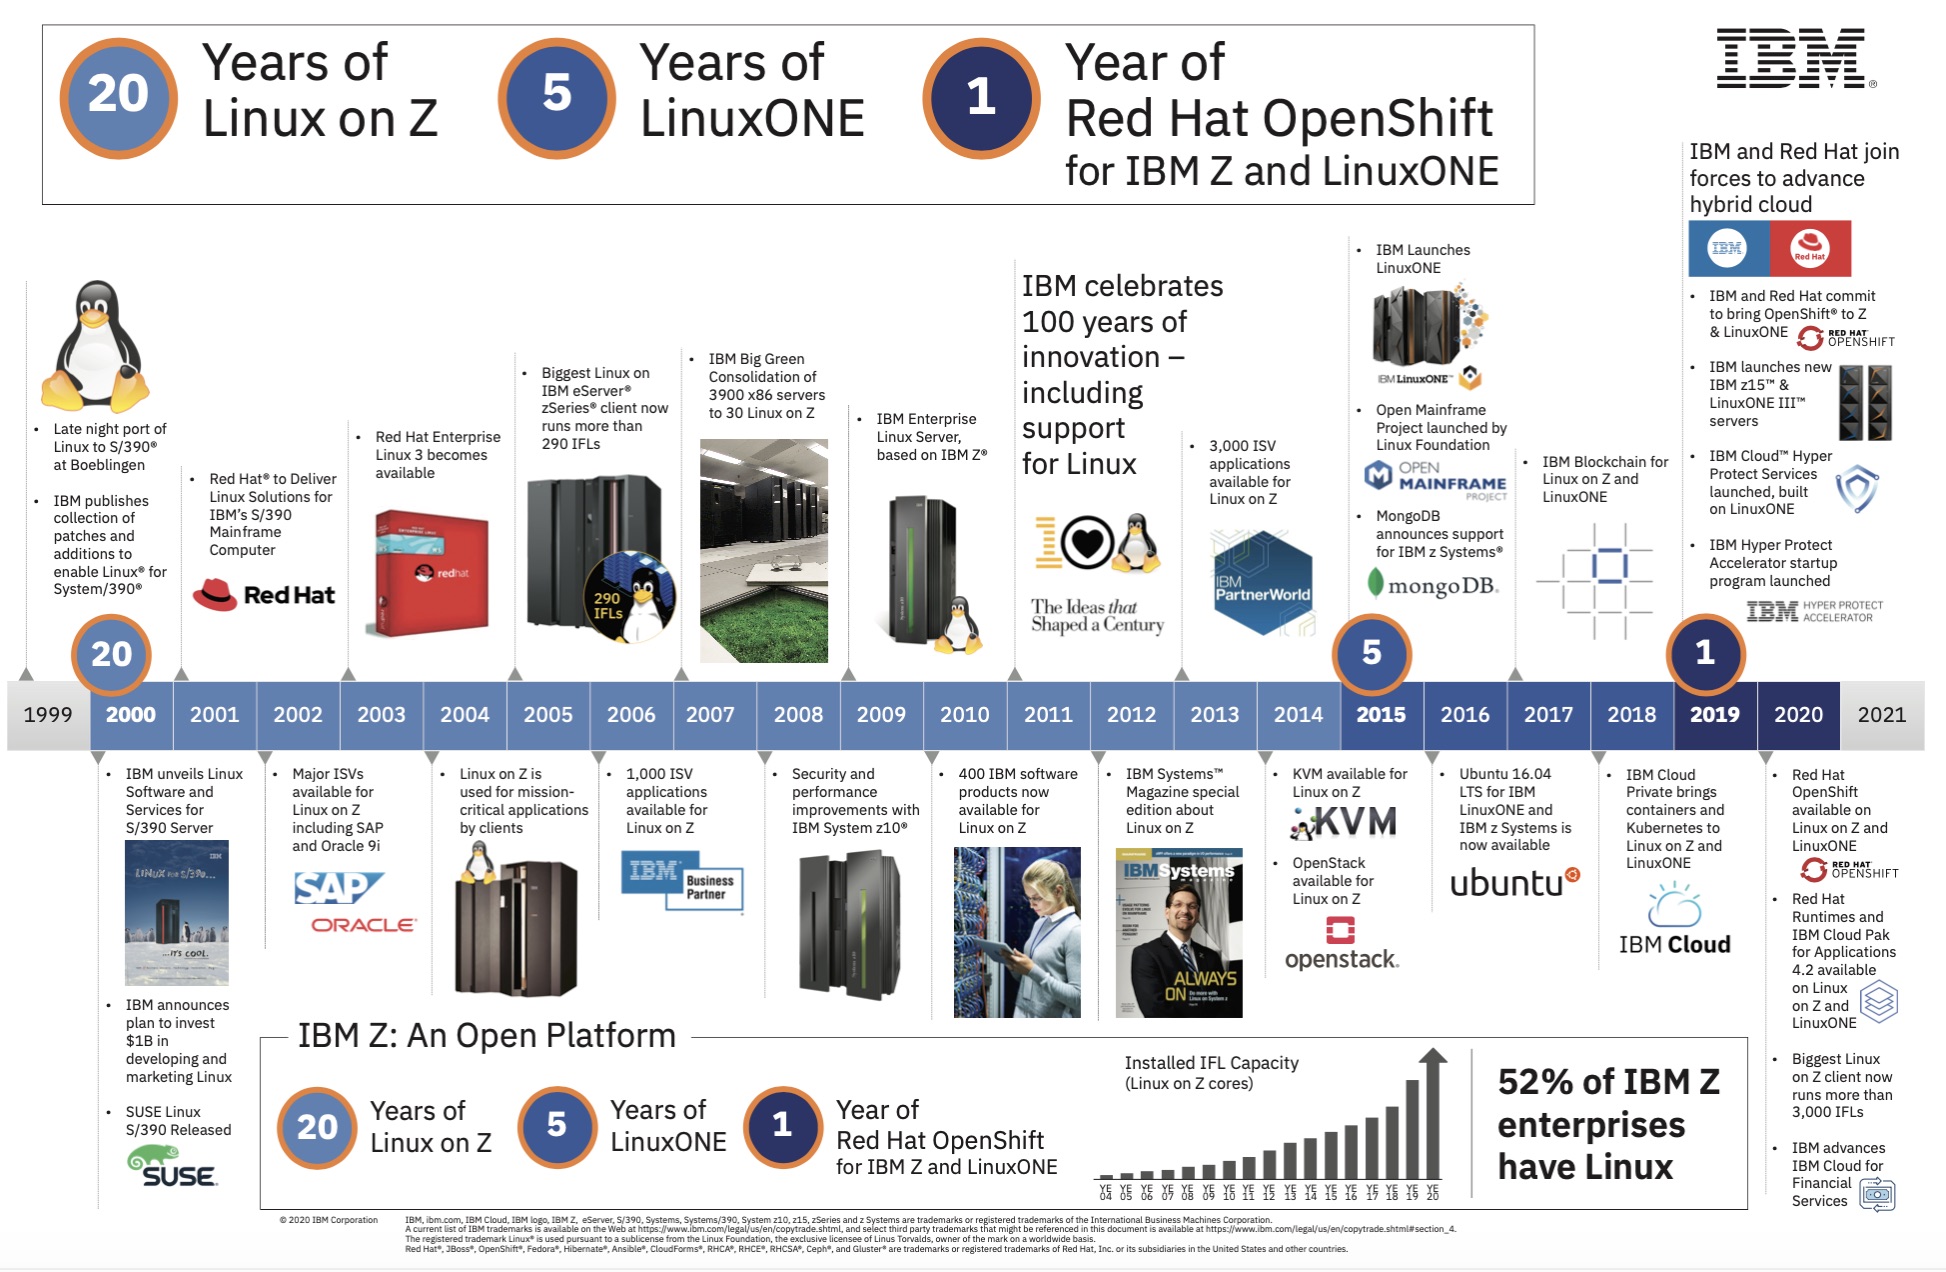 IBM Celebrates 20th Anniversary of Linux on Z, 5 Years of LinuxONE